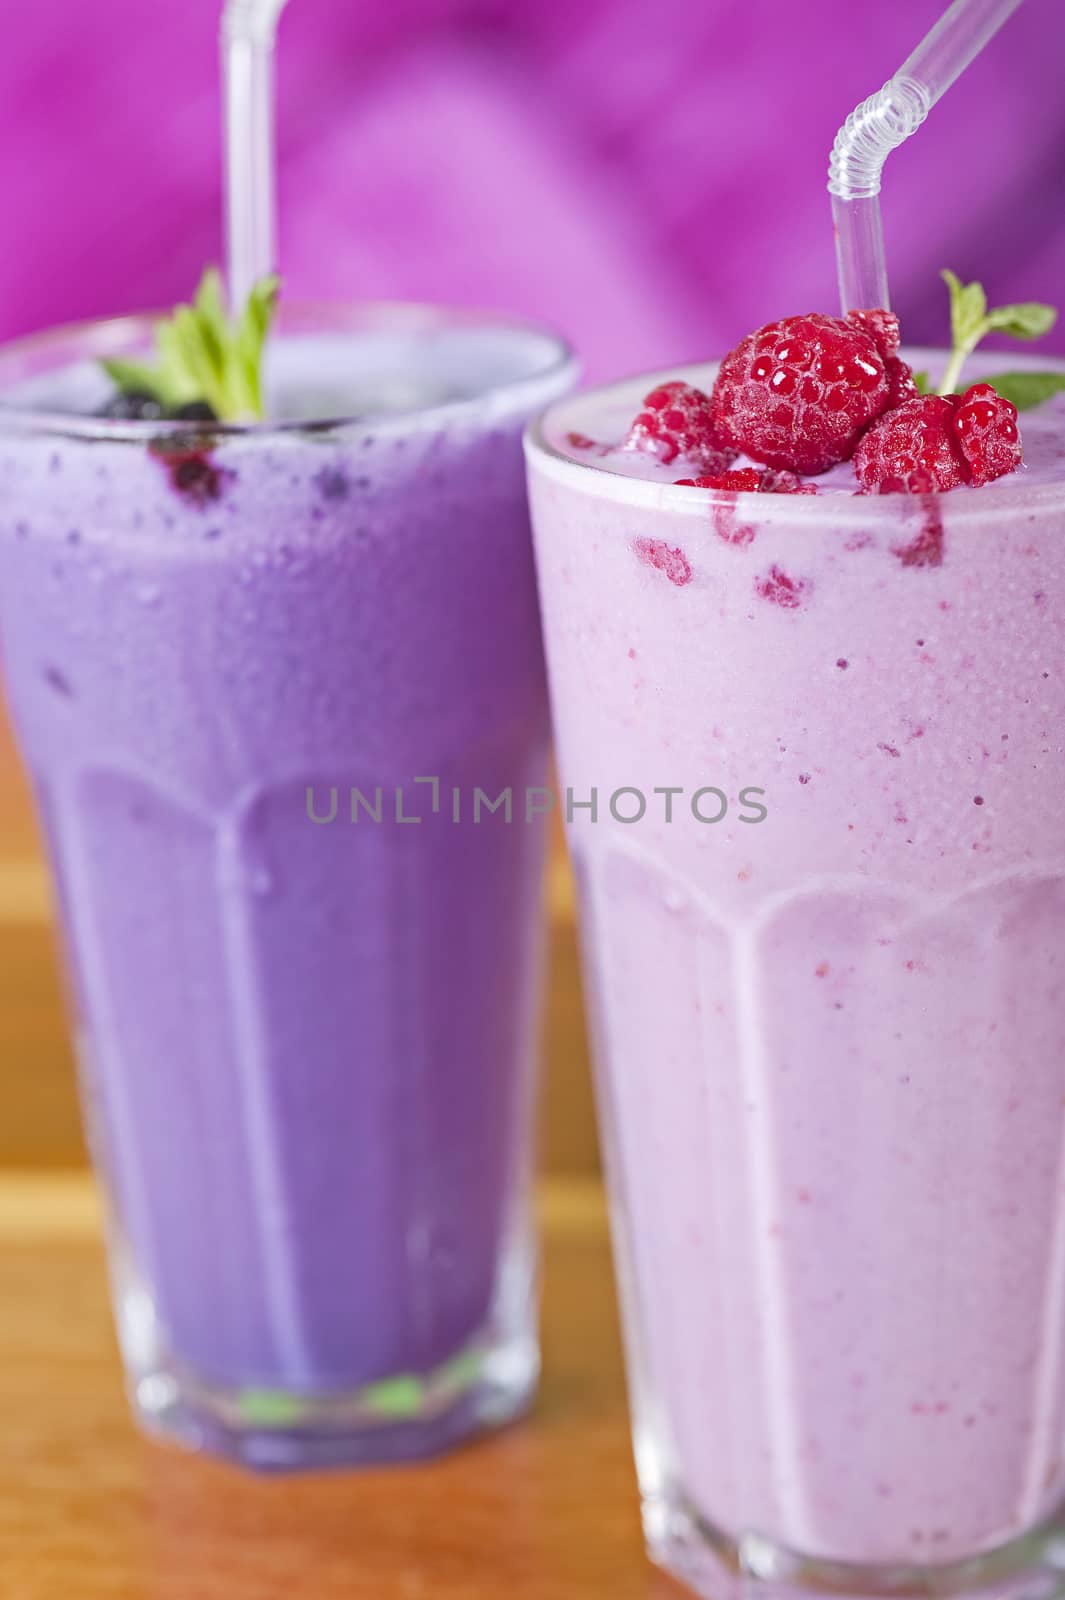 Blueberry and a raspberry fresh fruit fruit smoothie